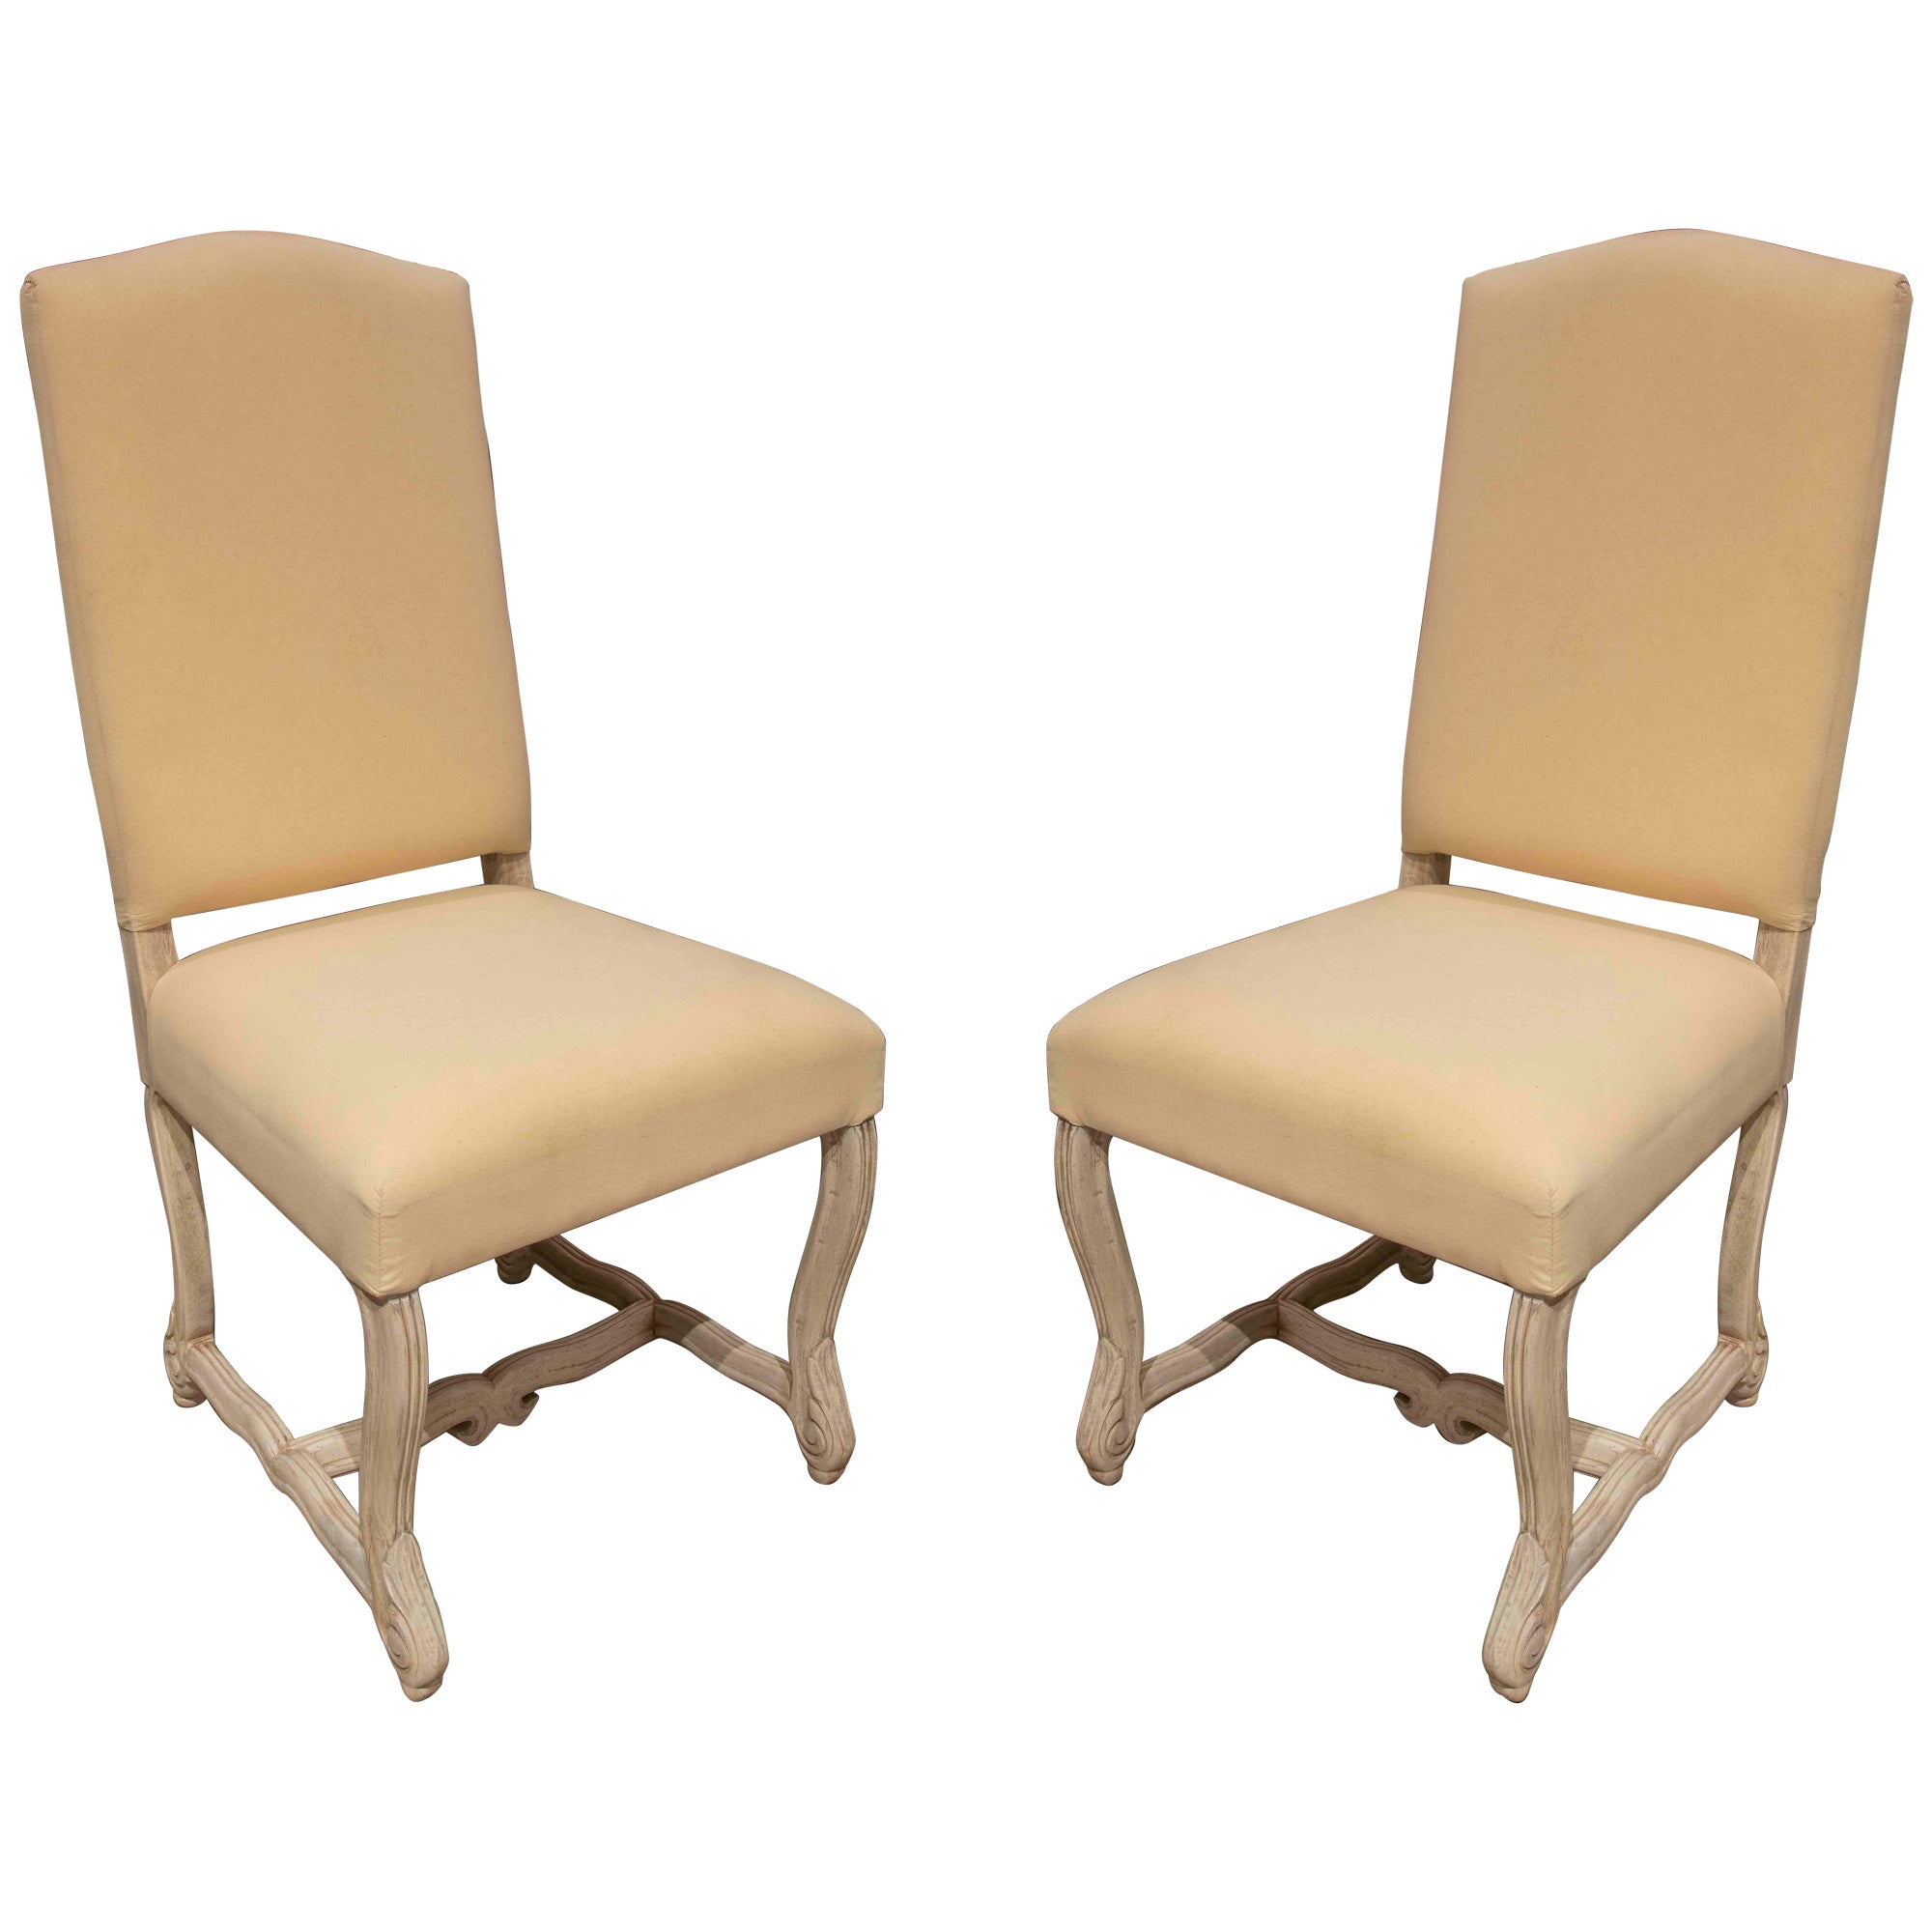 Pair of  Wooden High Backed Dining Chairs for Upholstery